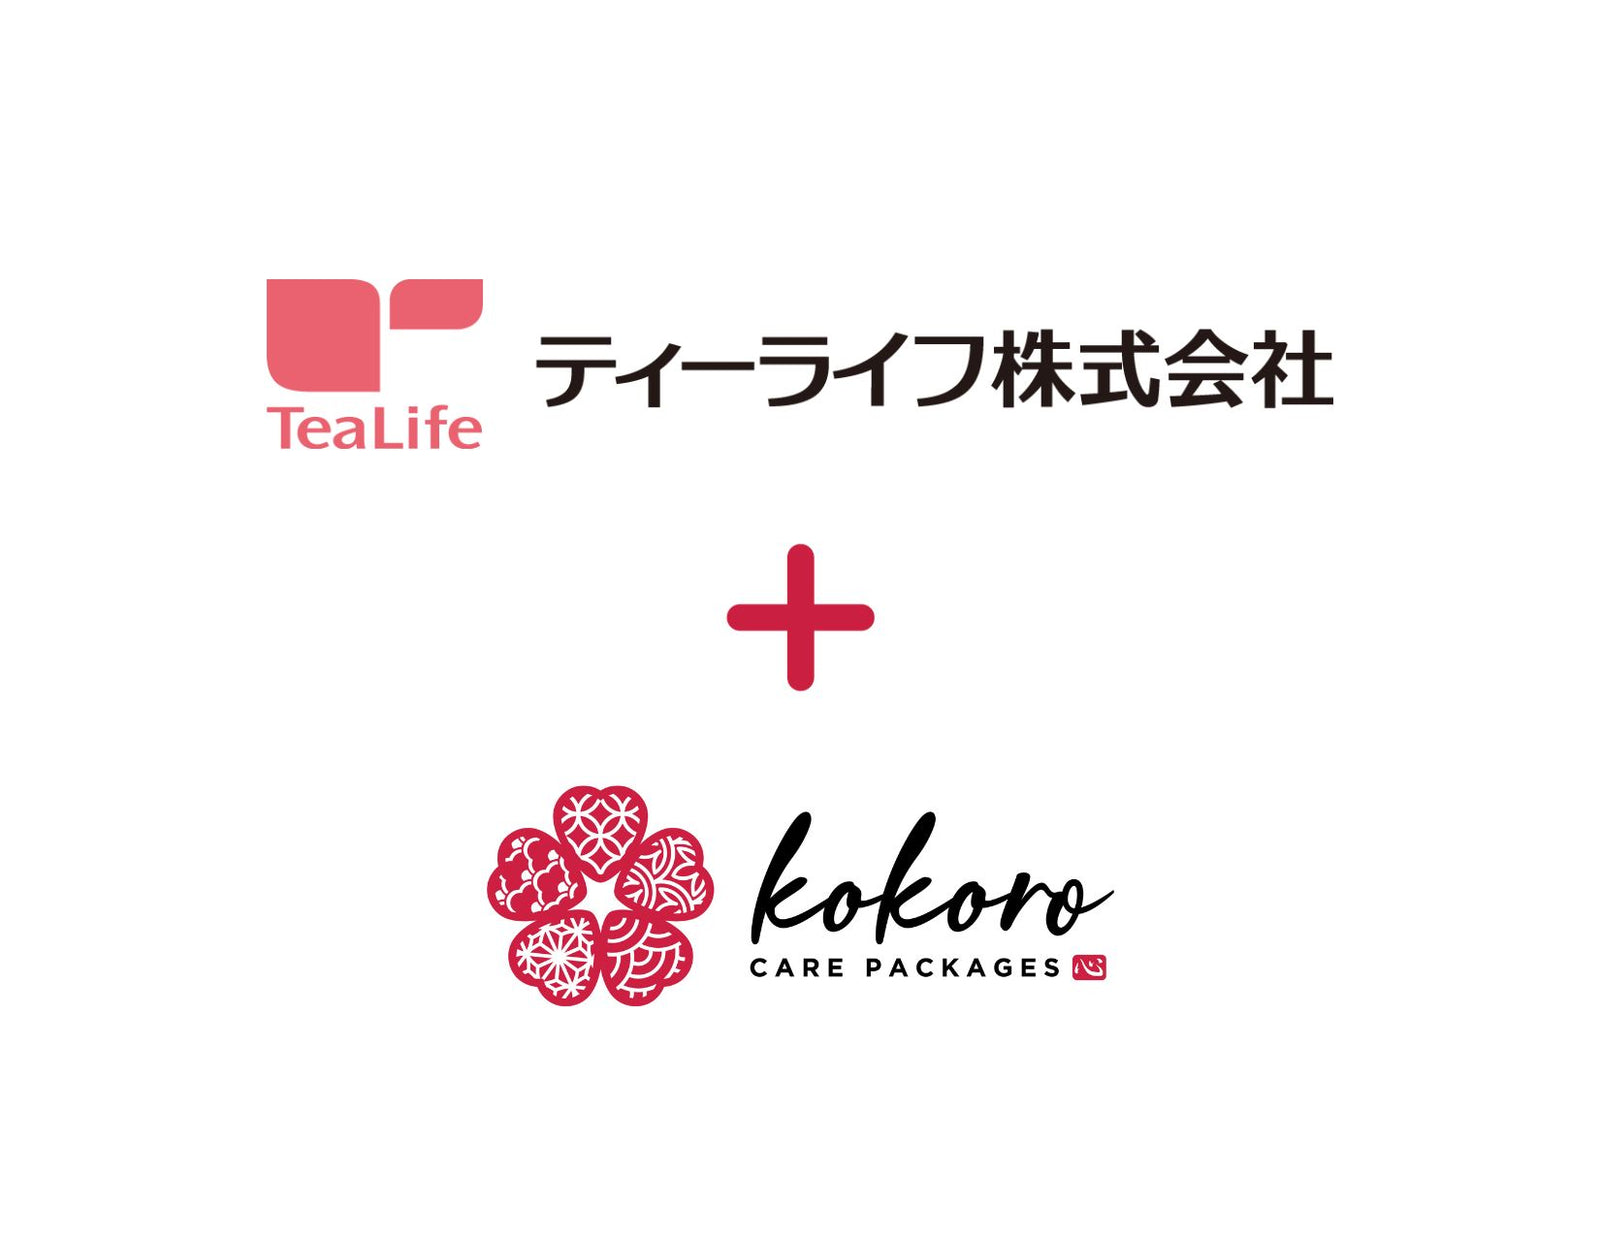 Exciting News: Kokoro Care Packages will now become part of the Tea Life Co. Ltd. family!